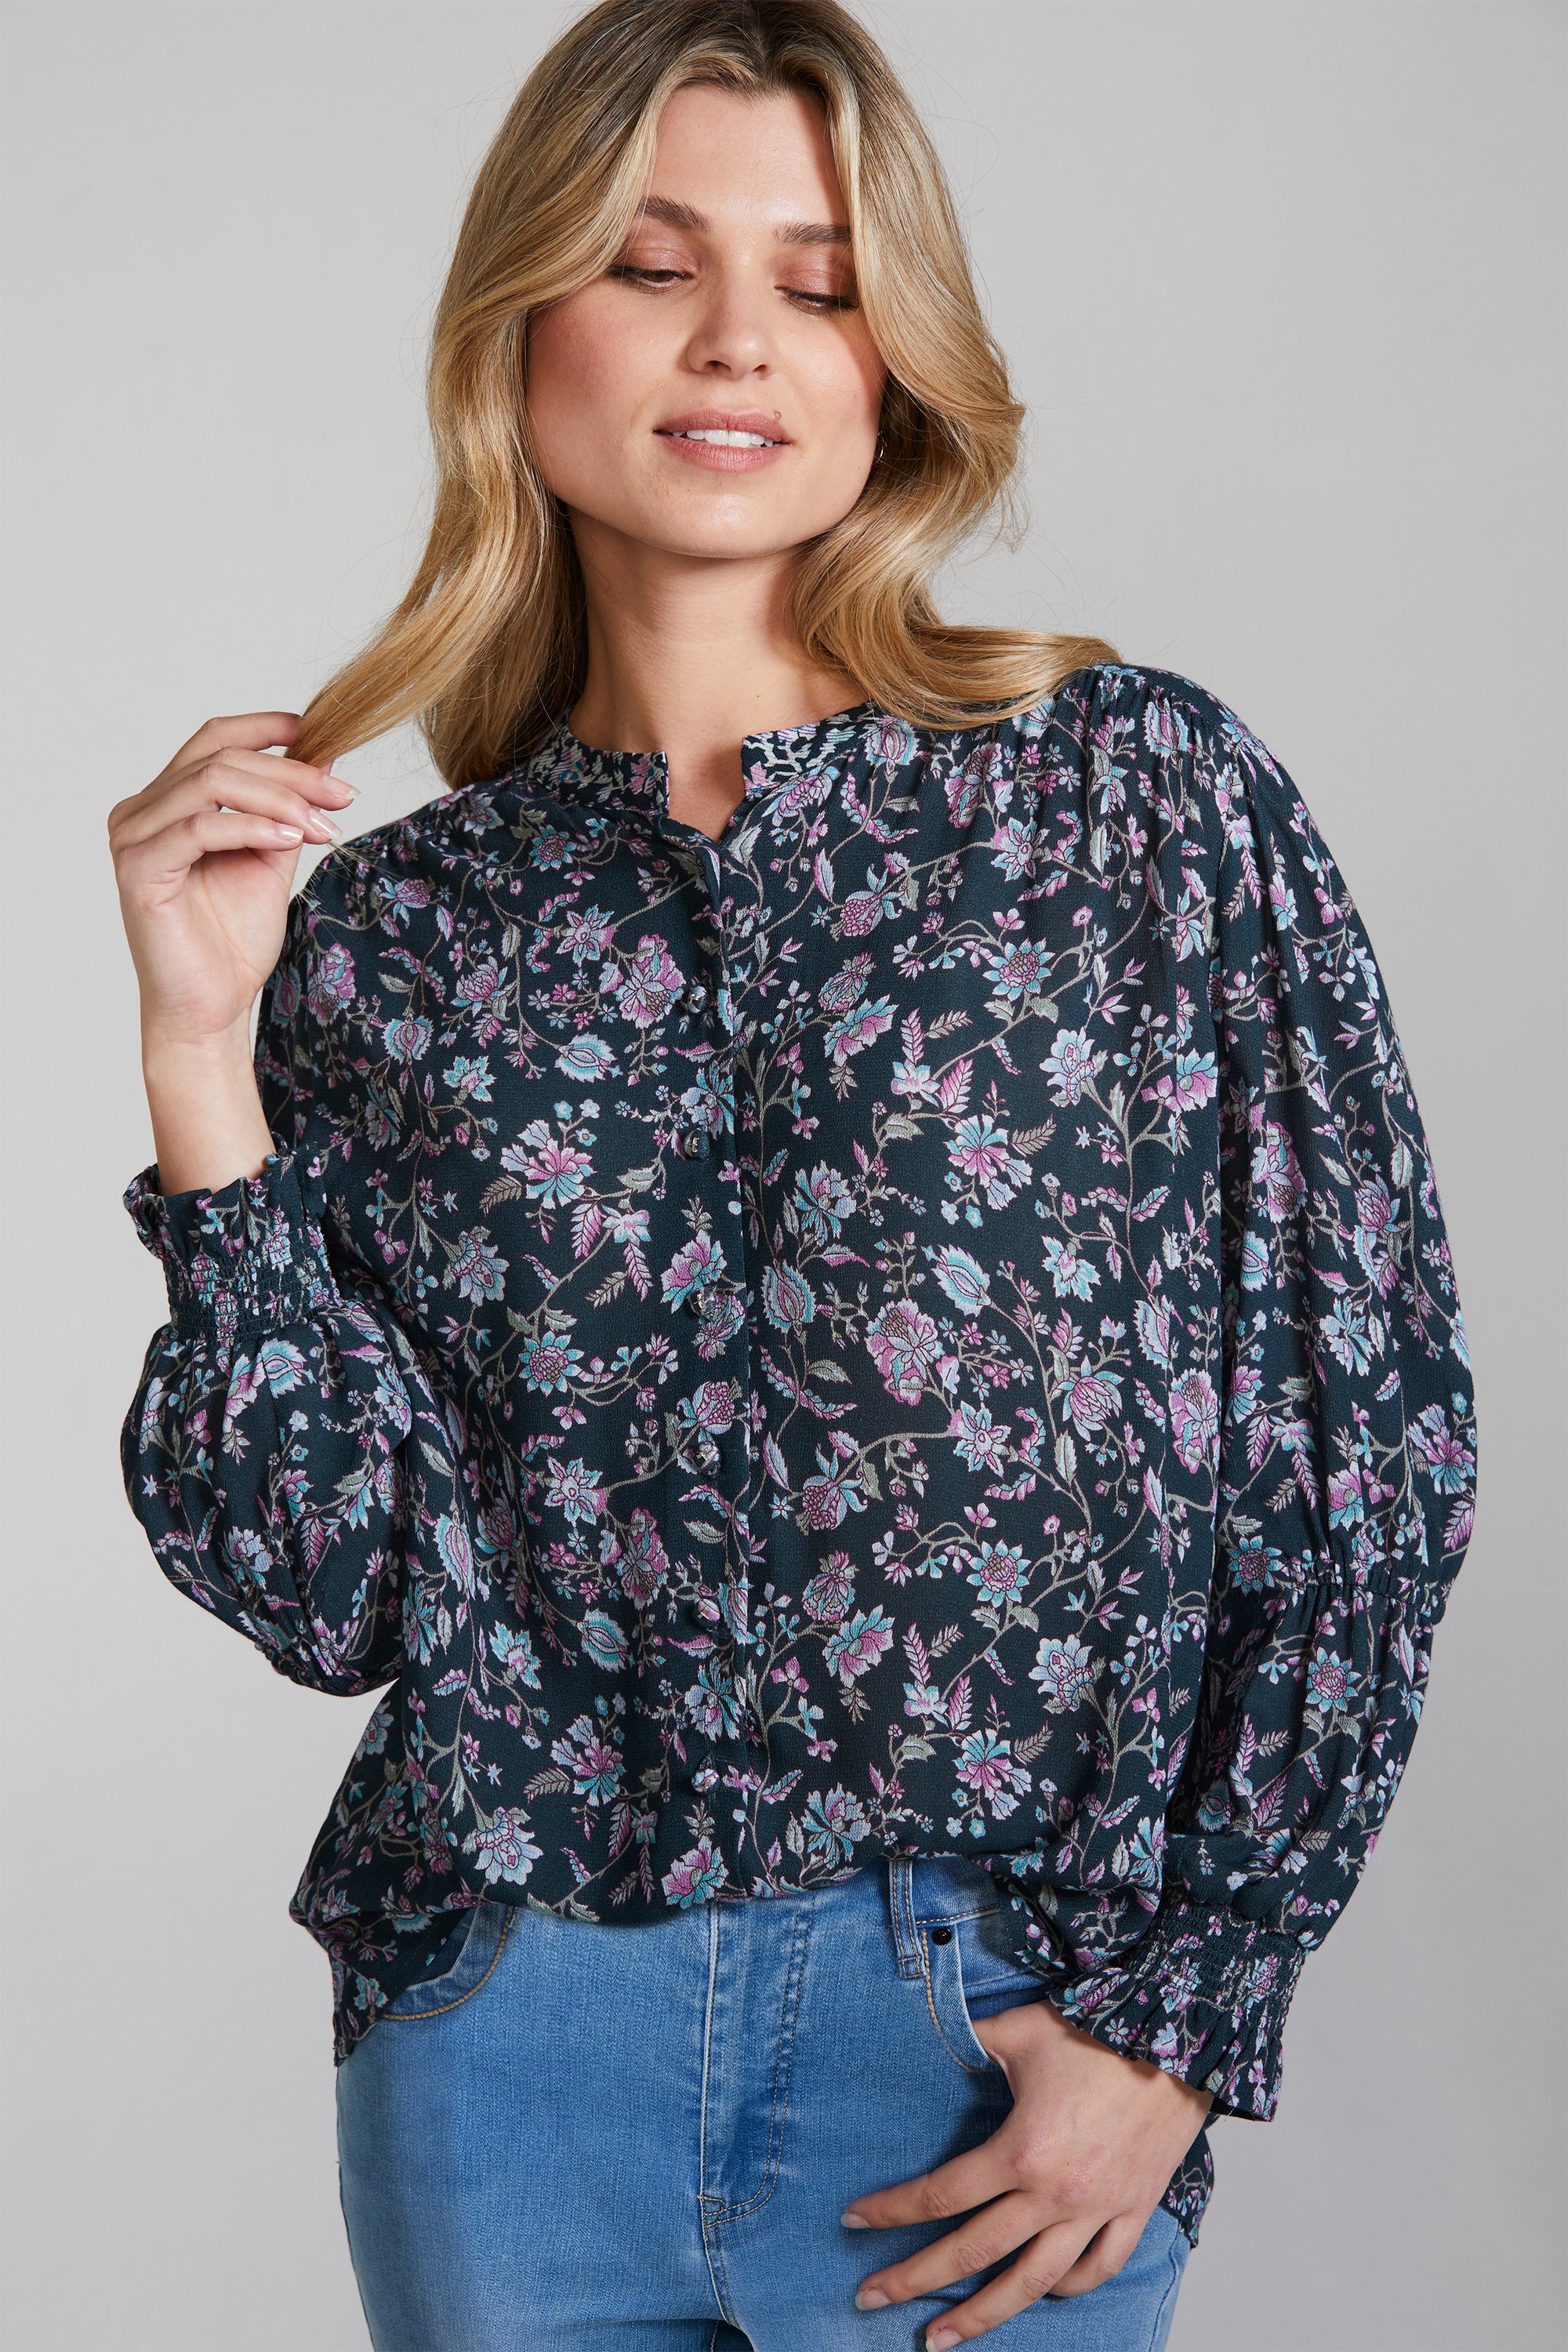 Isabella Floral Women's Shirt - Lania the Label | Buy Lania the Label ...